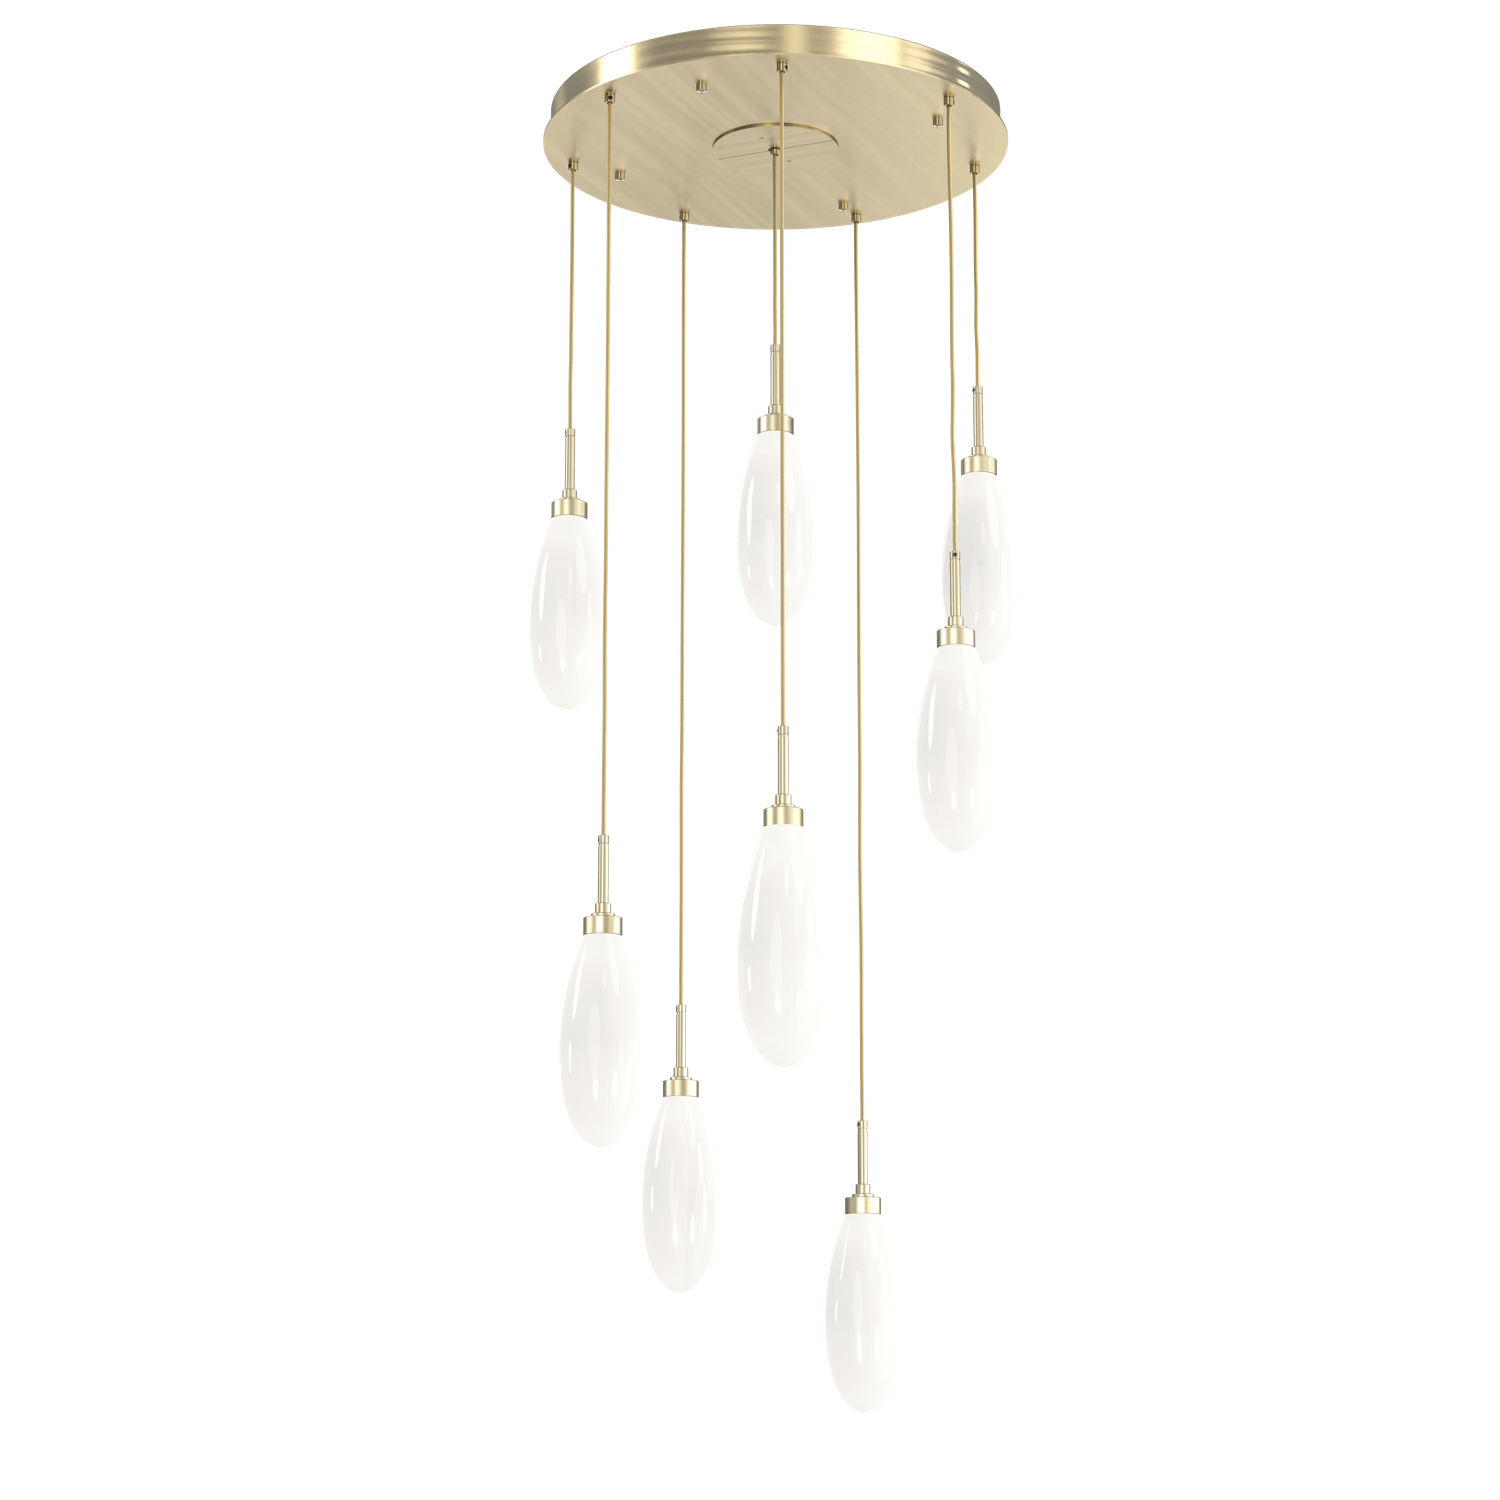 CHB0071-08-HB-WL-LL-Hammerton-Studio-Fiori-8-light-round-pendant-chandelier-with-heritage-brass-finish-and-opal-white-glass-shades-and-LED-lamping